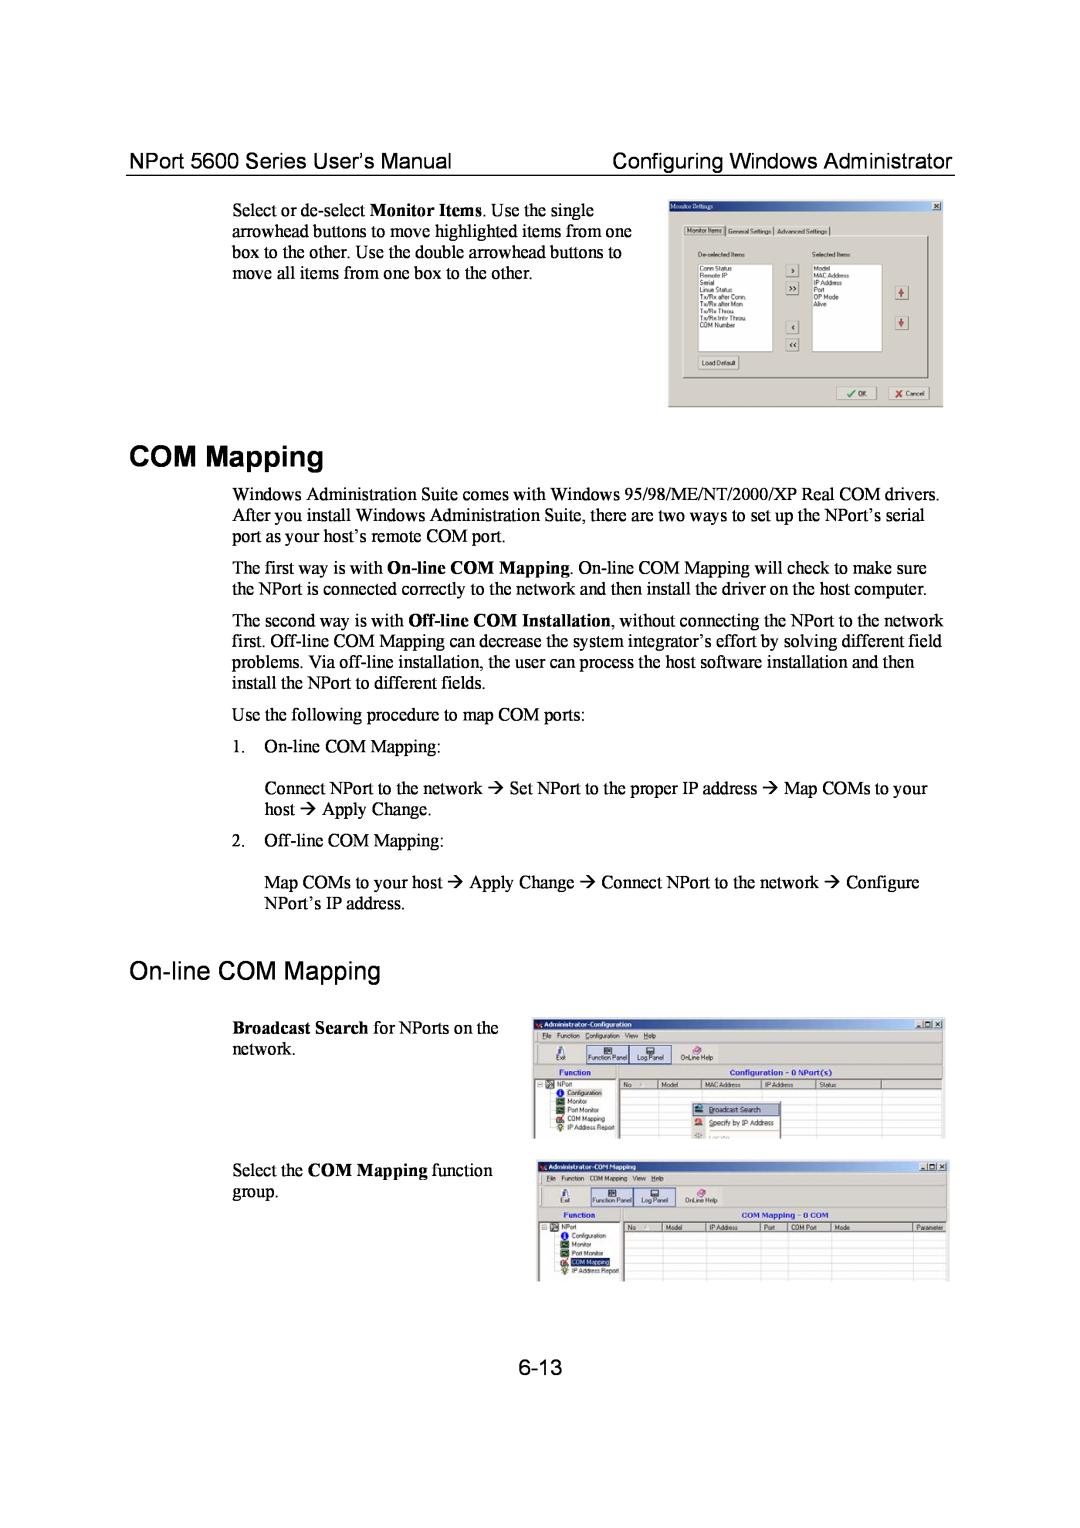 Moxa Technologies On-line COM Mapping, 6-13, NPort 5600 Series User’s Manual, Configuring Windows Administrator 